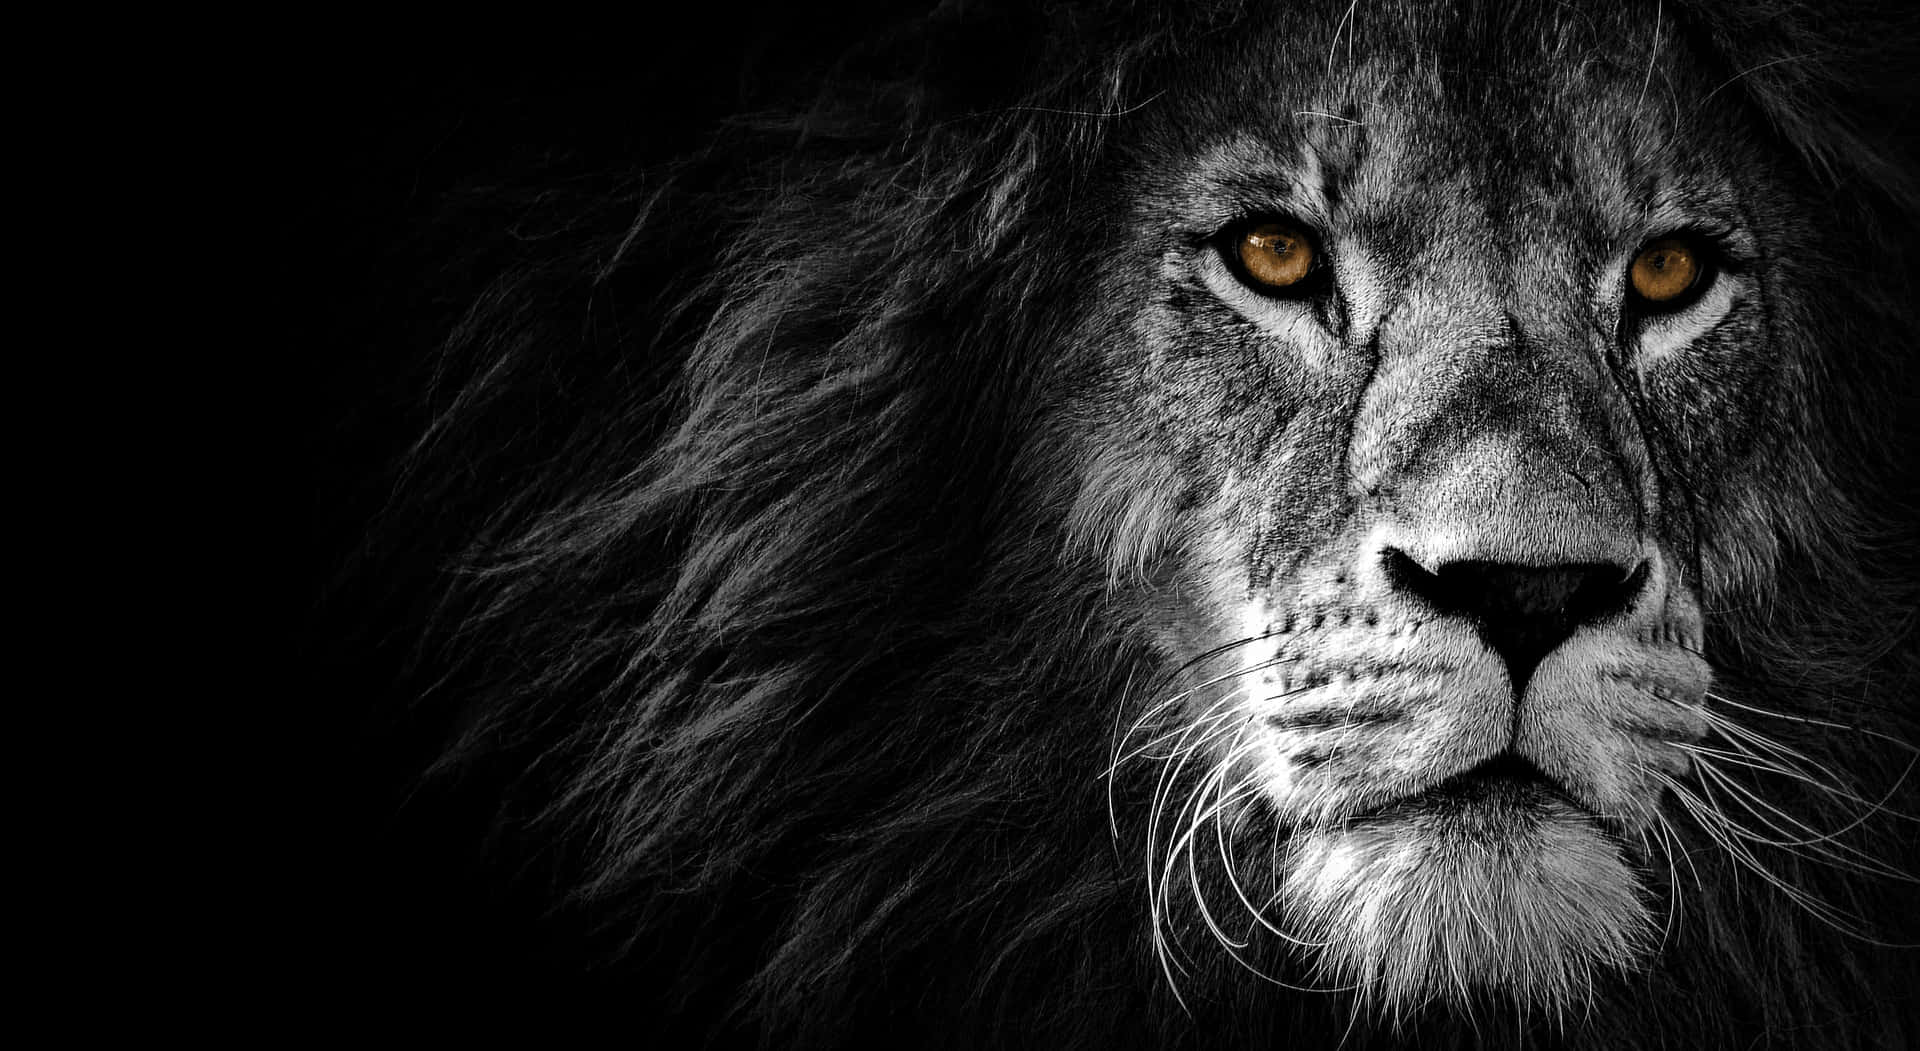 A Black And White Image Of A Lion Wallpaper